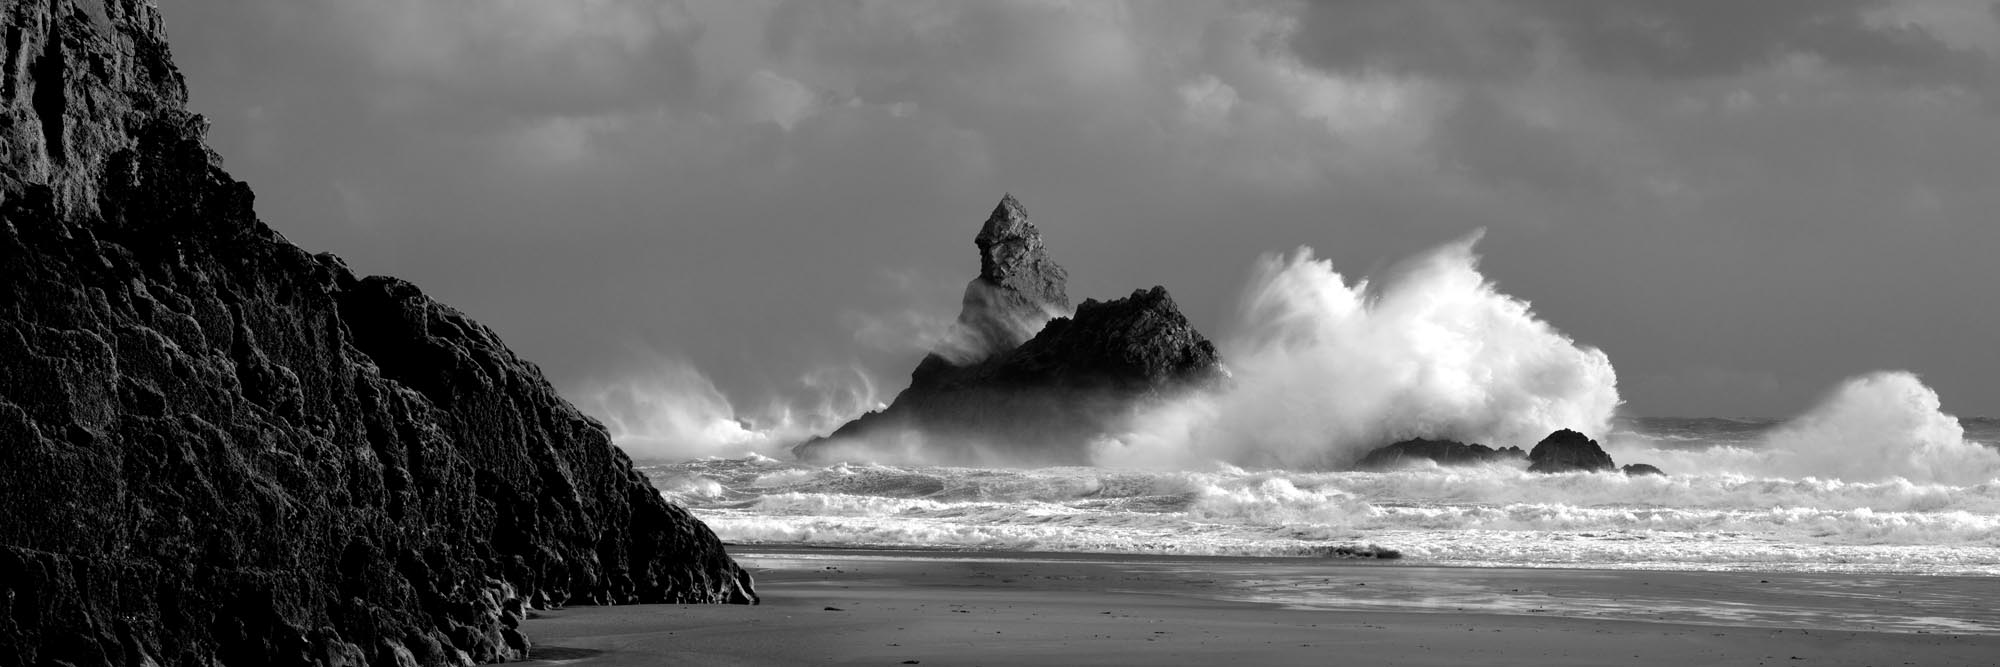 Panorama of story waves crashing against Church Rock on the Pembrokeshire coast b&w